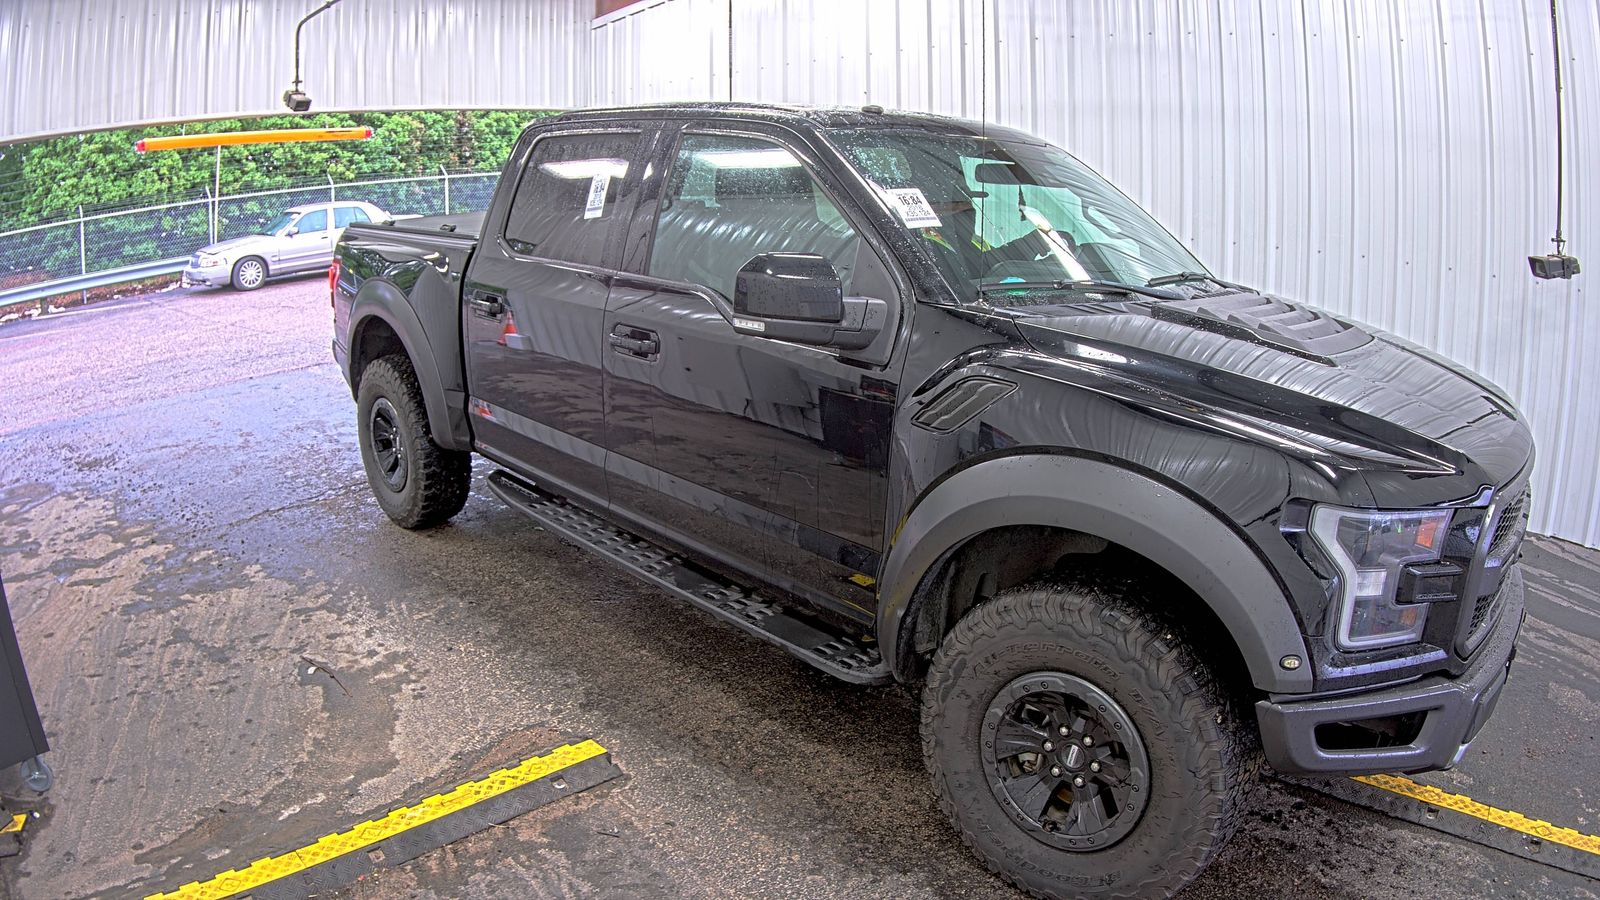 2018 Ford F150 4X4 CR RAPTOR 35,124 mi - Raptor - Lankh 2018 Ford F150 Drive Mode Not Available